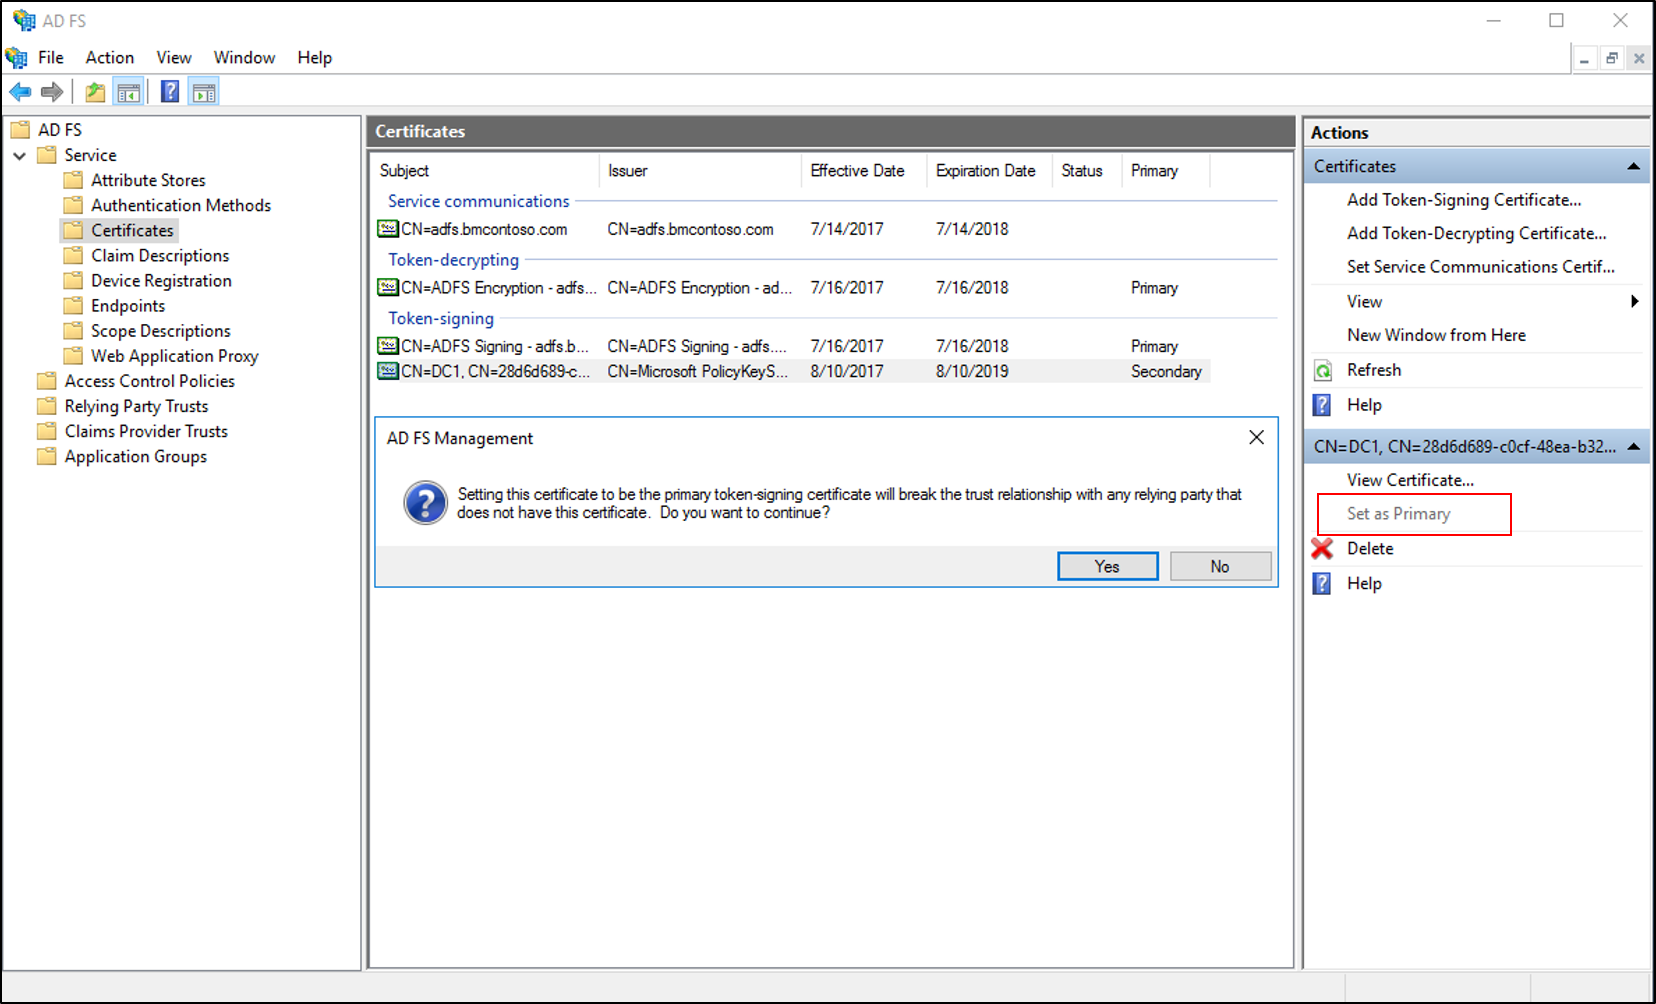 Screenshot of the AD FS dialog box, highlighting the Set as Primary option.